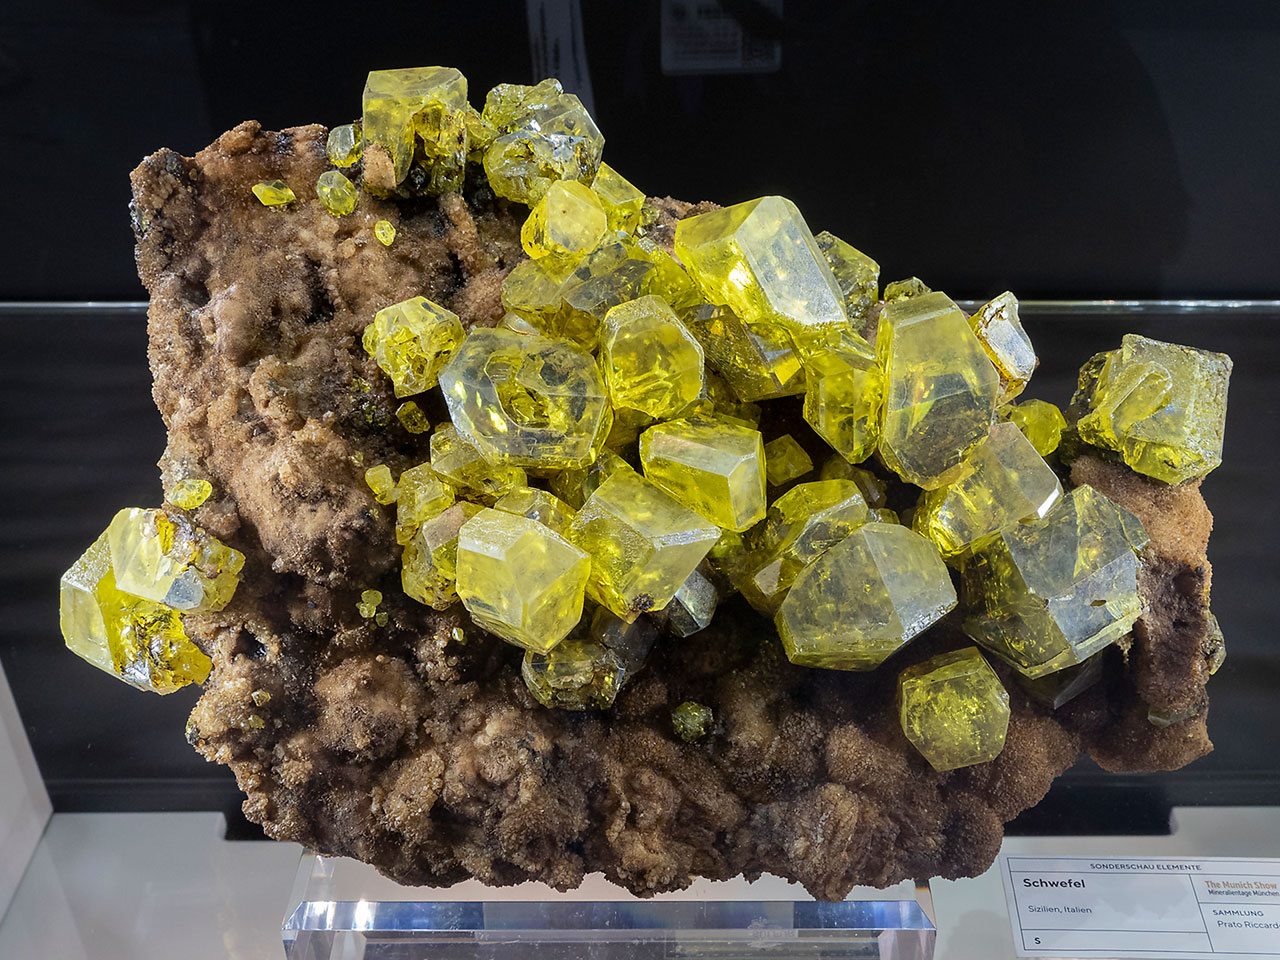 Big cluster of yellow native sulfur crystals from Sicily, Italy